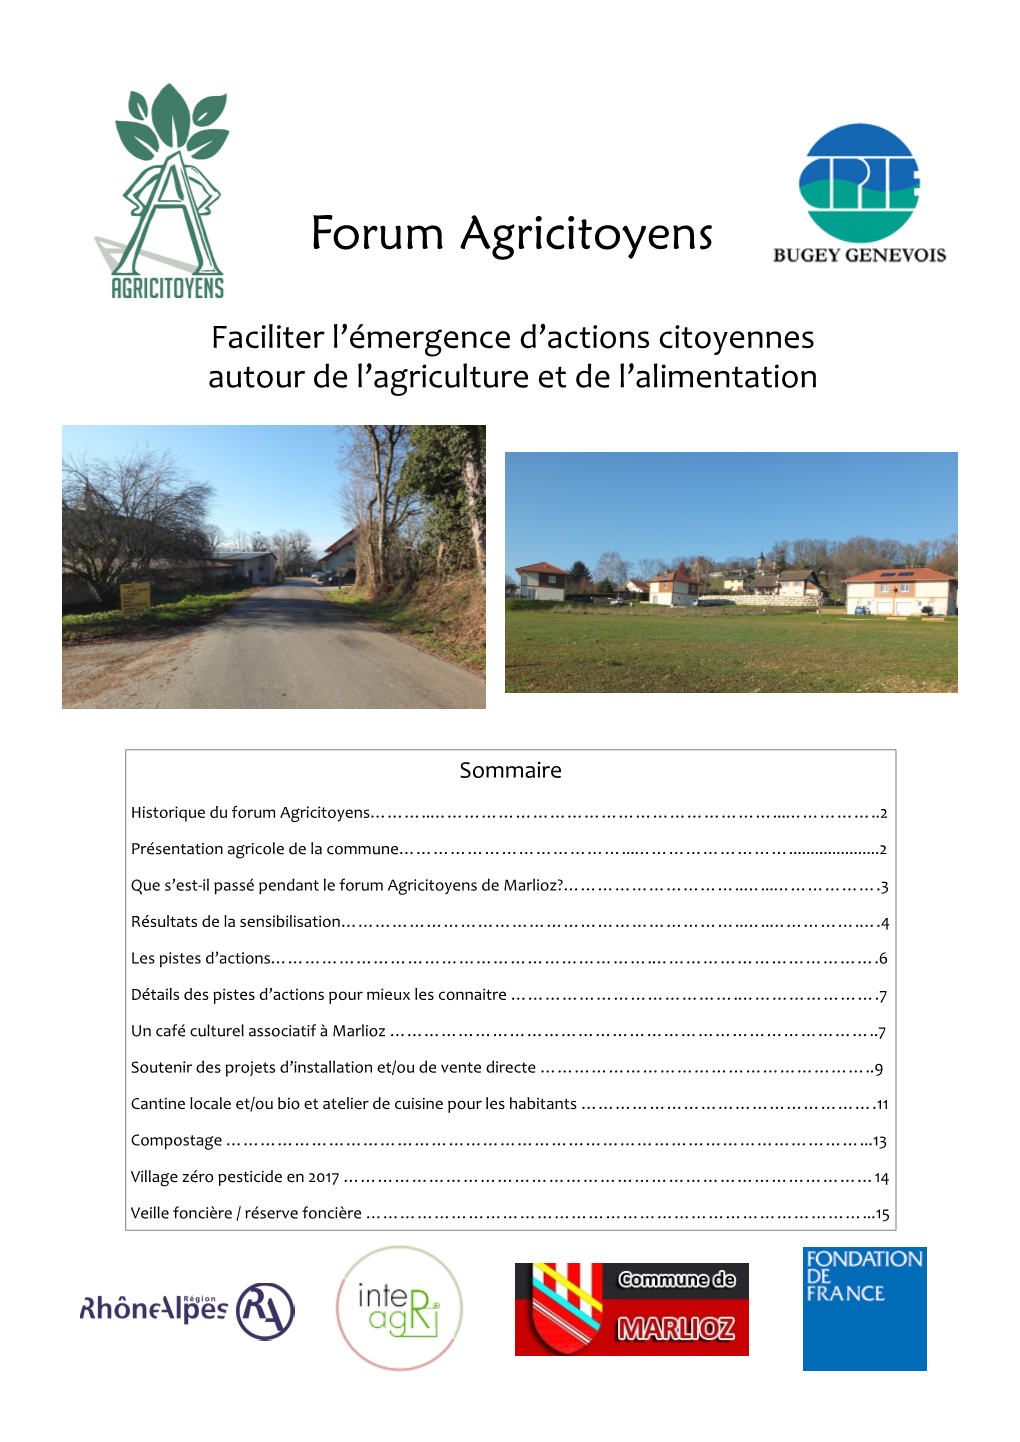 Forum Agricitoyens